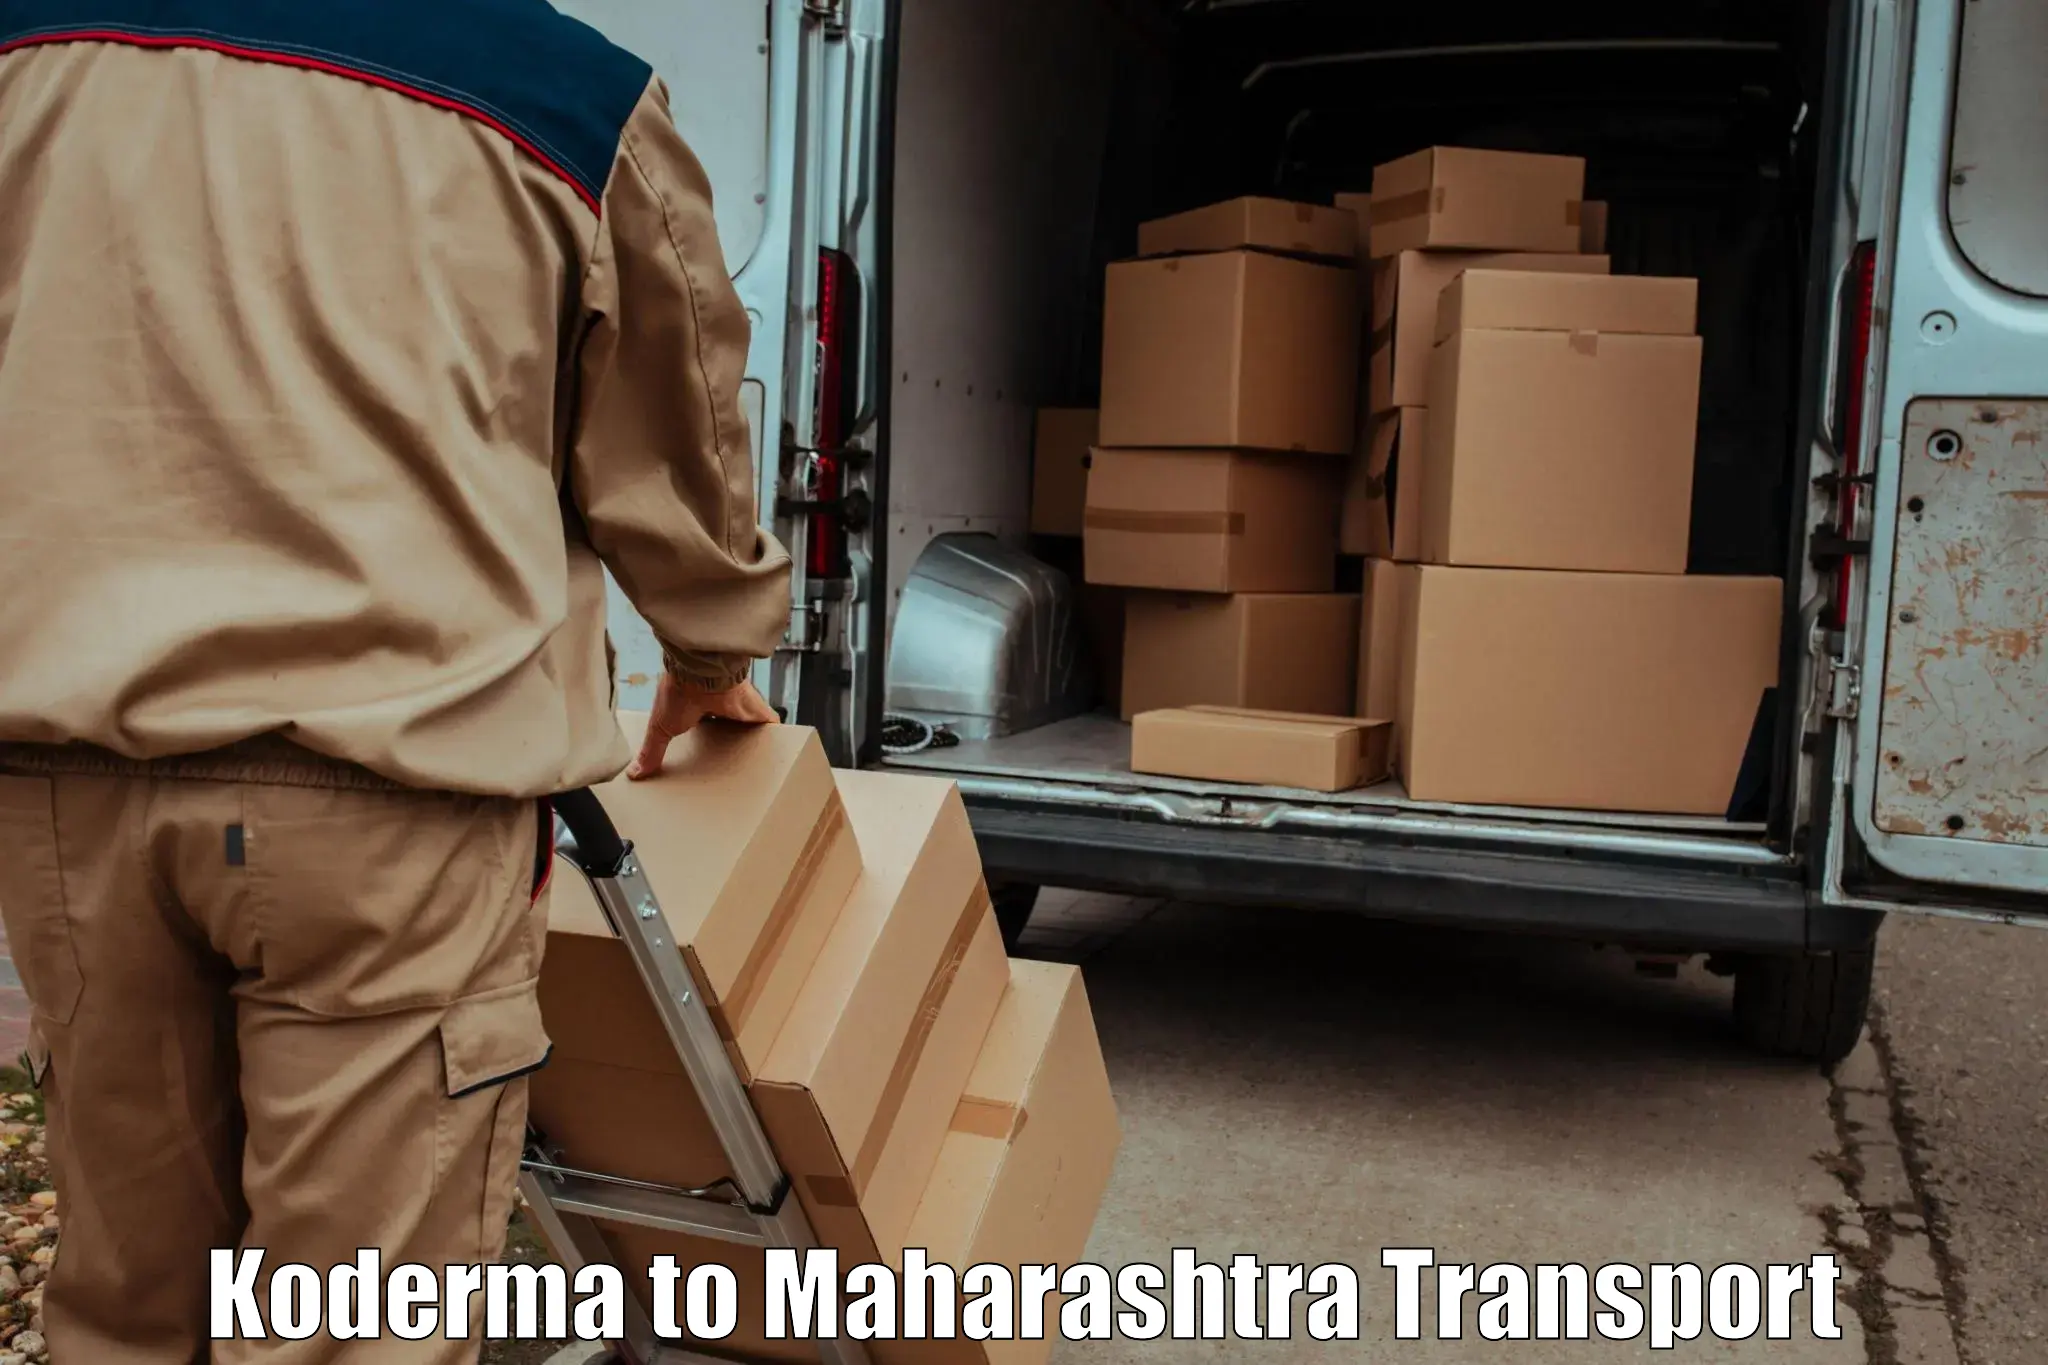 Transportation services in Koderma to Chandrapur